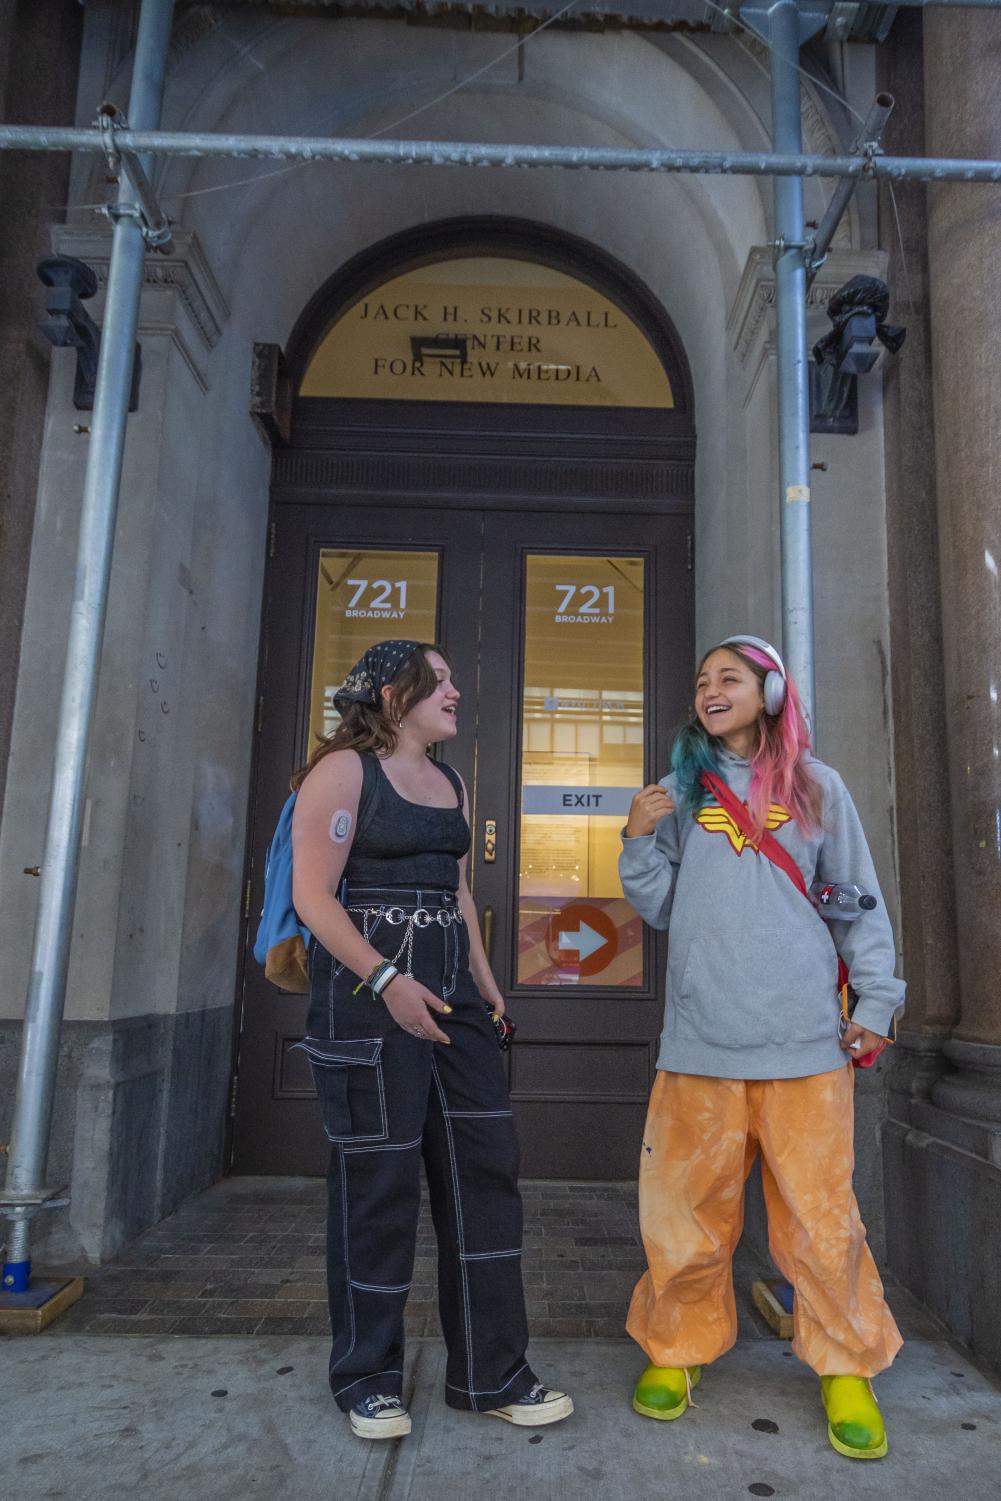 Cassie Lustig (left) and Moriah Reibman (right) are laughing as they stand outside of a Tisch building. Cassie is wearing a black tank top, black denim pants with white stitching, a blue backpack and a chain belt. Moriah is wearing a graphic gray hoodie, orange baggy cargo pants and a red bag.